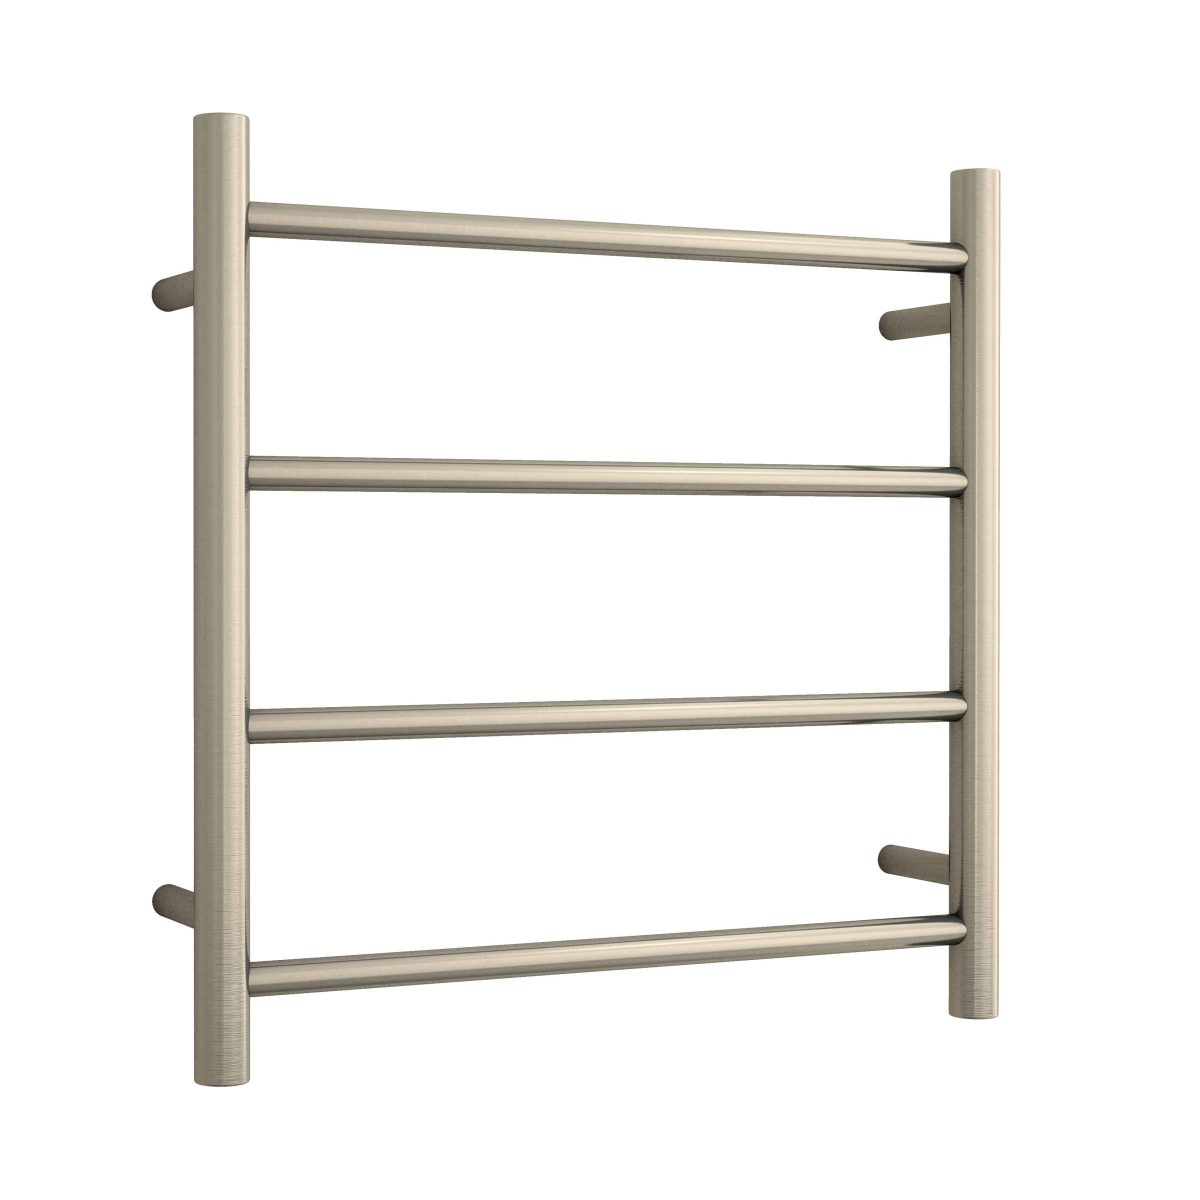 THERMOGROUP SR25MBN ROUND LADDER HEATED TOWEL RAIL BRUSHED NICKEL